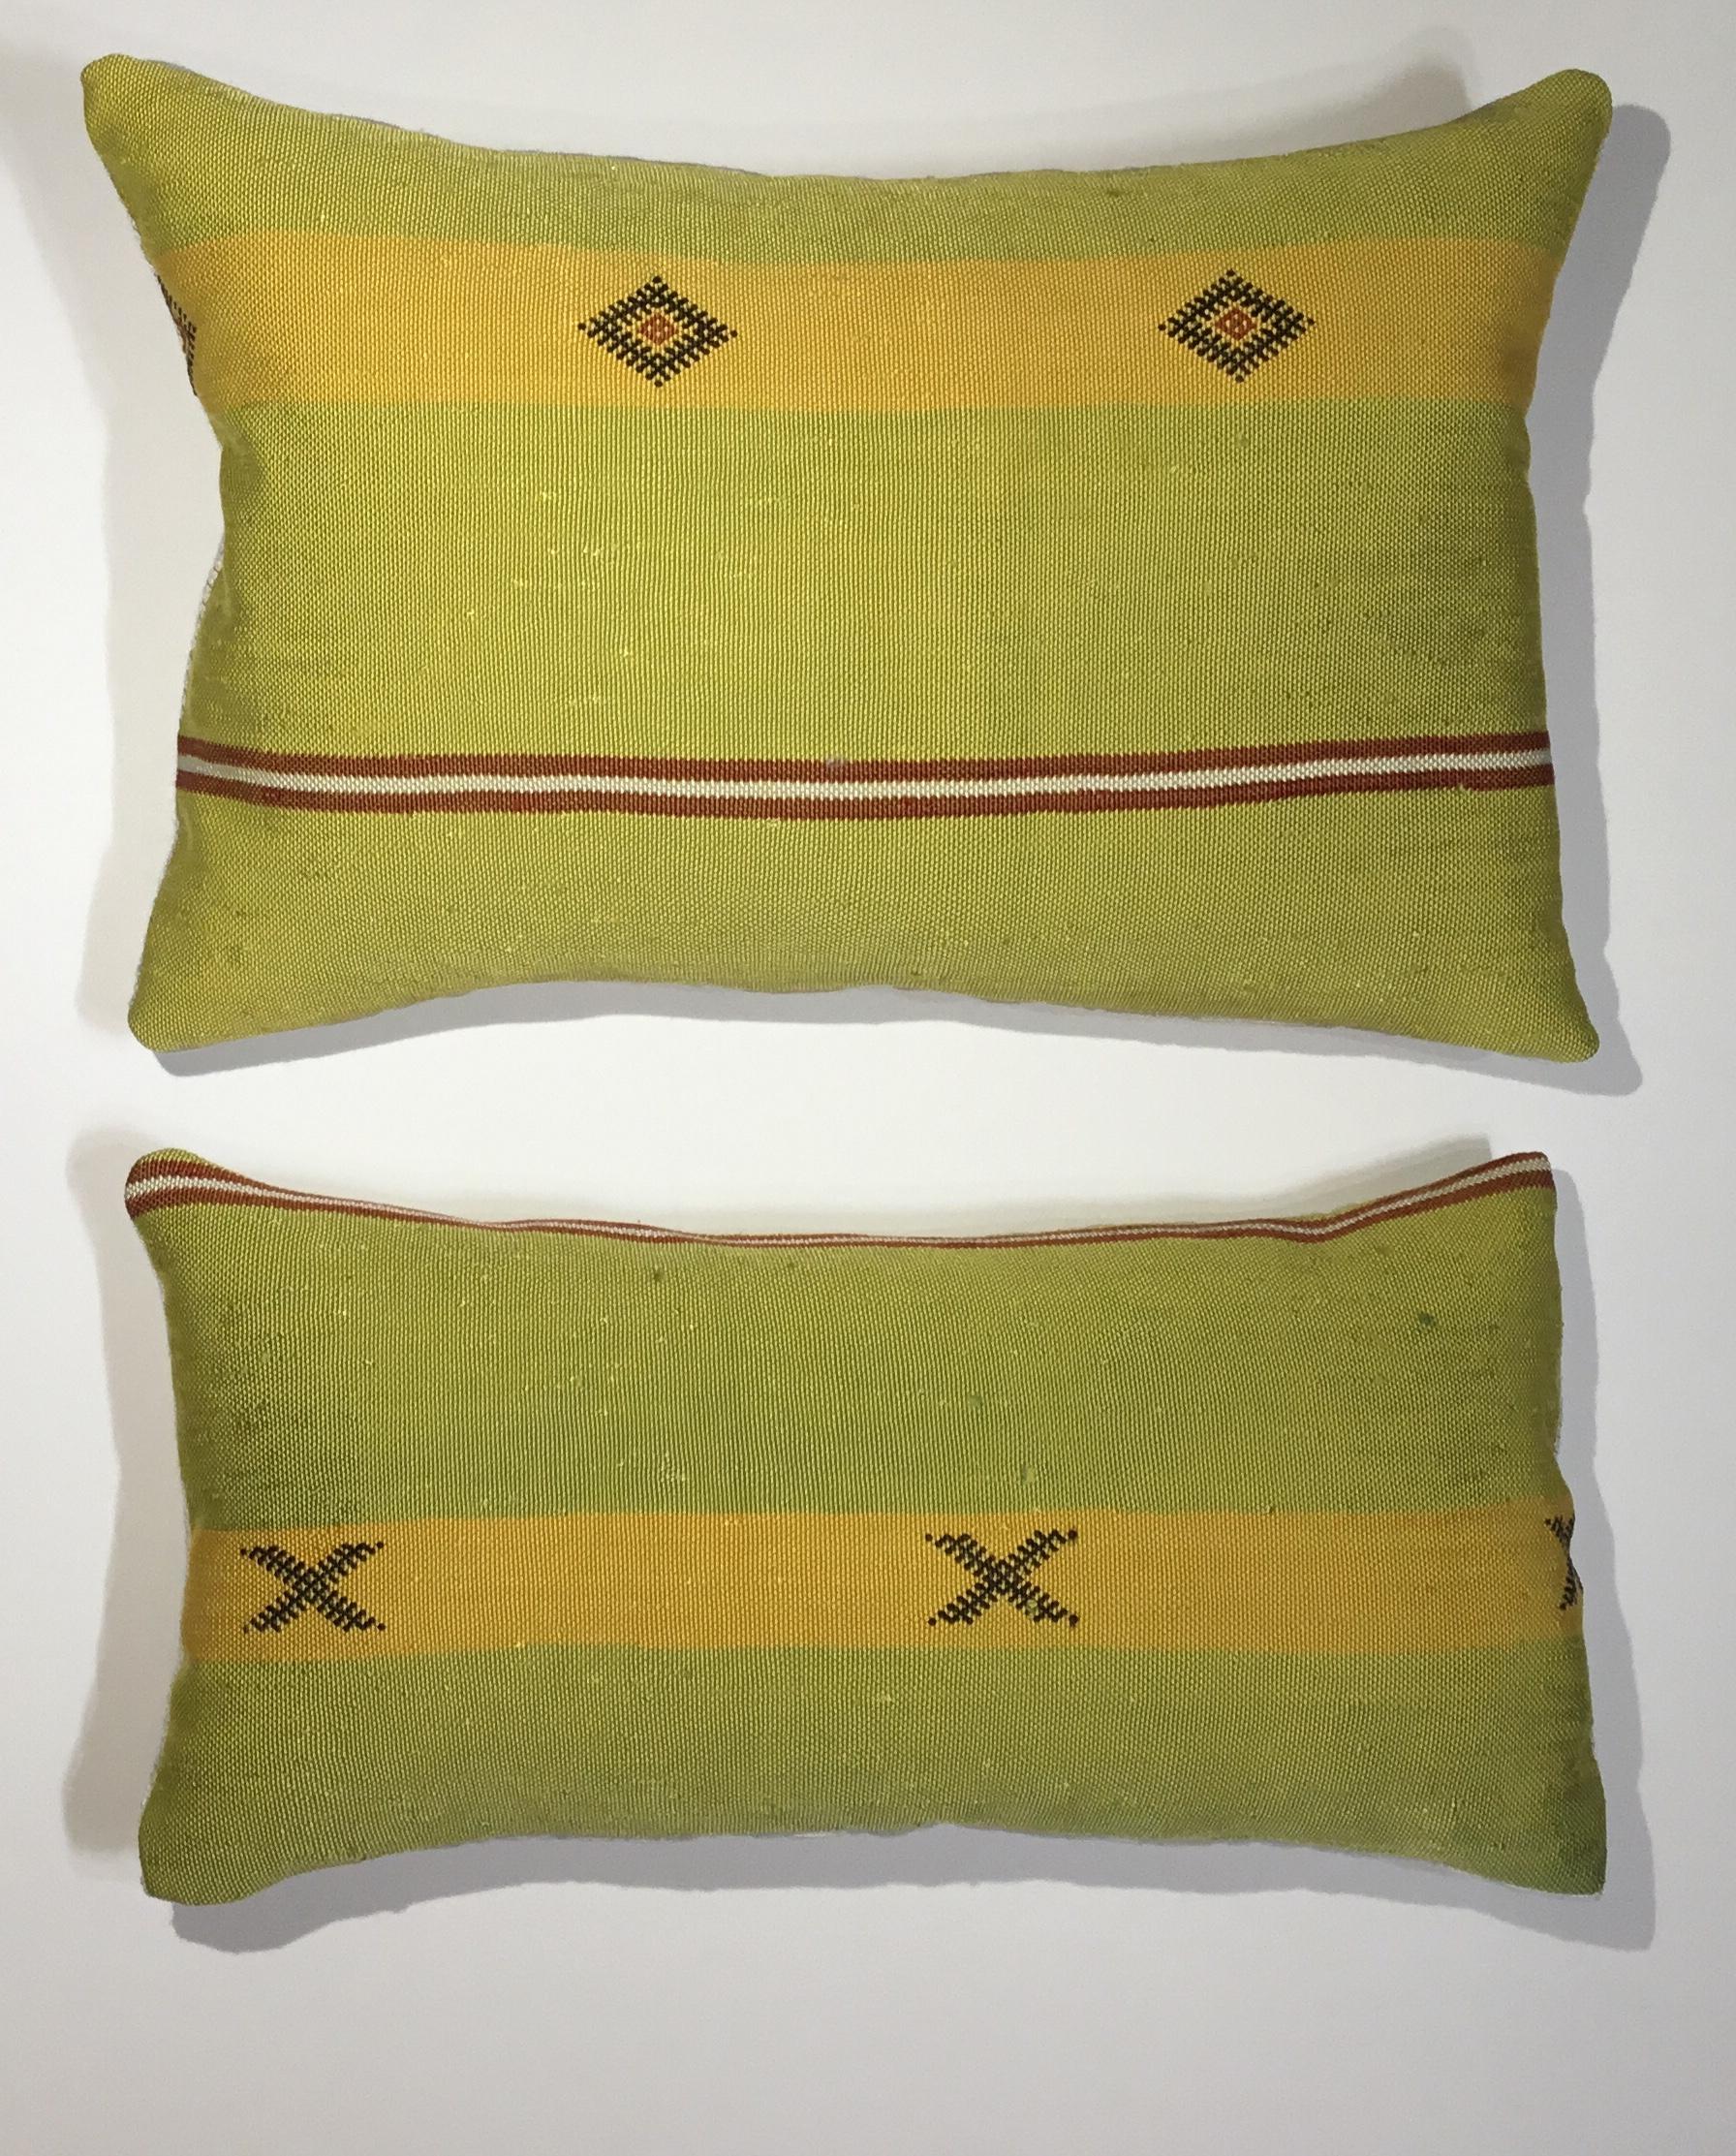 Beautiful pair of pillows made of handwoven flat-weave Kilim textile fragment, with geometric motifs, unusual funky colors of black muster and vibrant. Lime, fine cotton backing, frash new inserts.
Sizes:
18.5” x 9”
19” x 12.5”.